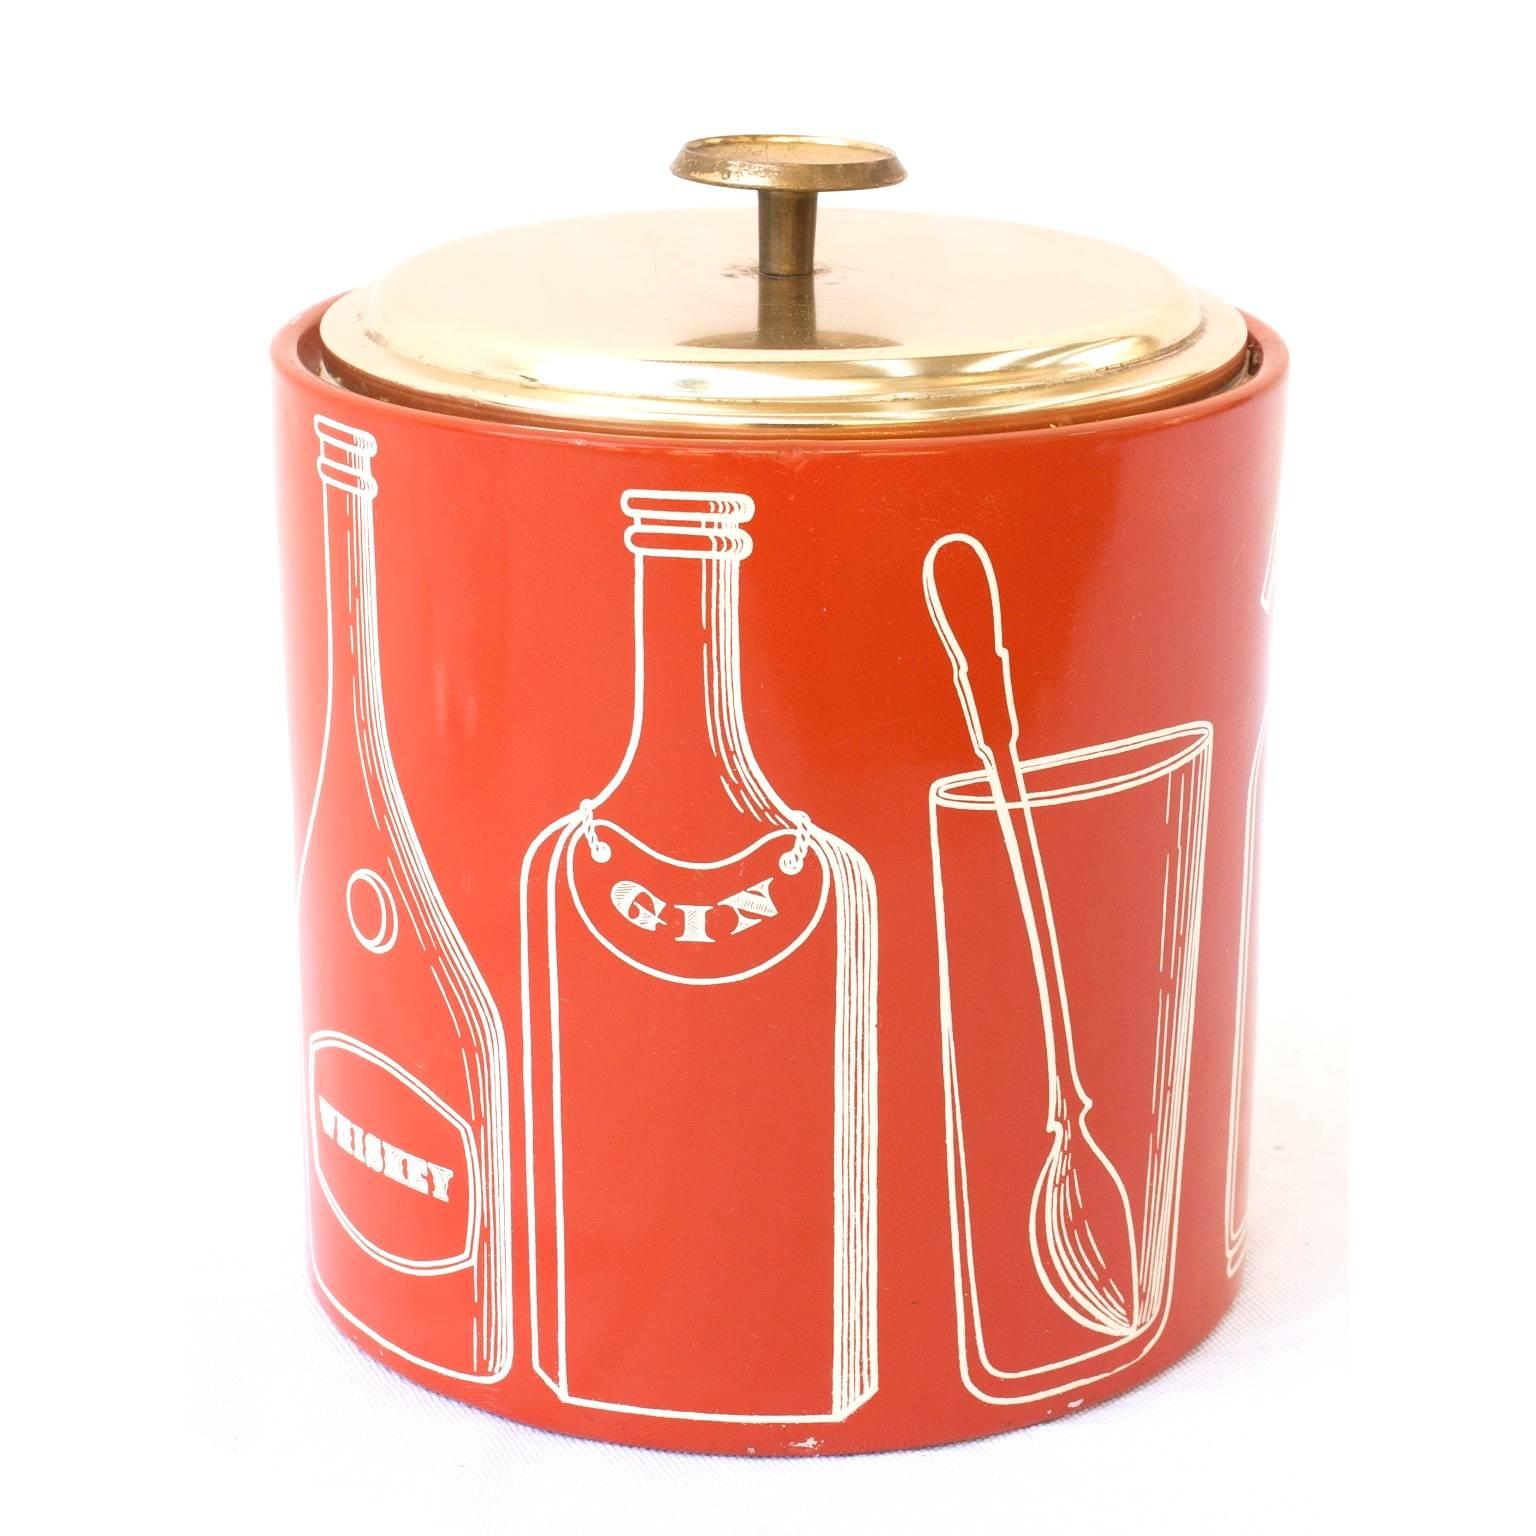 Aluminium screen printed ice bucket created by Piero Fornasetti for Fiat, Turin in circa 1960. Signed at the bottom. A few lines on the brass lid. Free shipping.